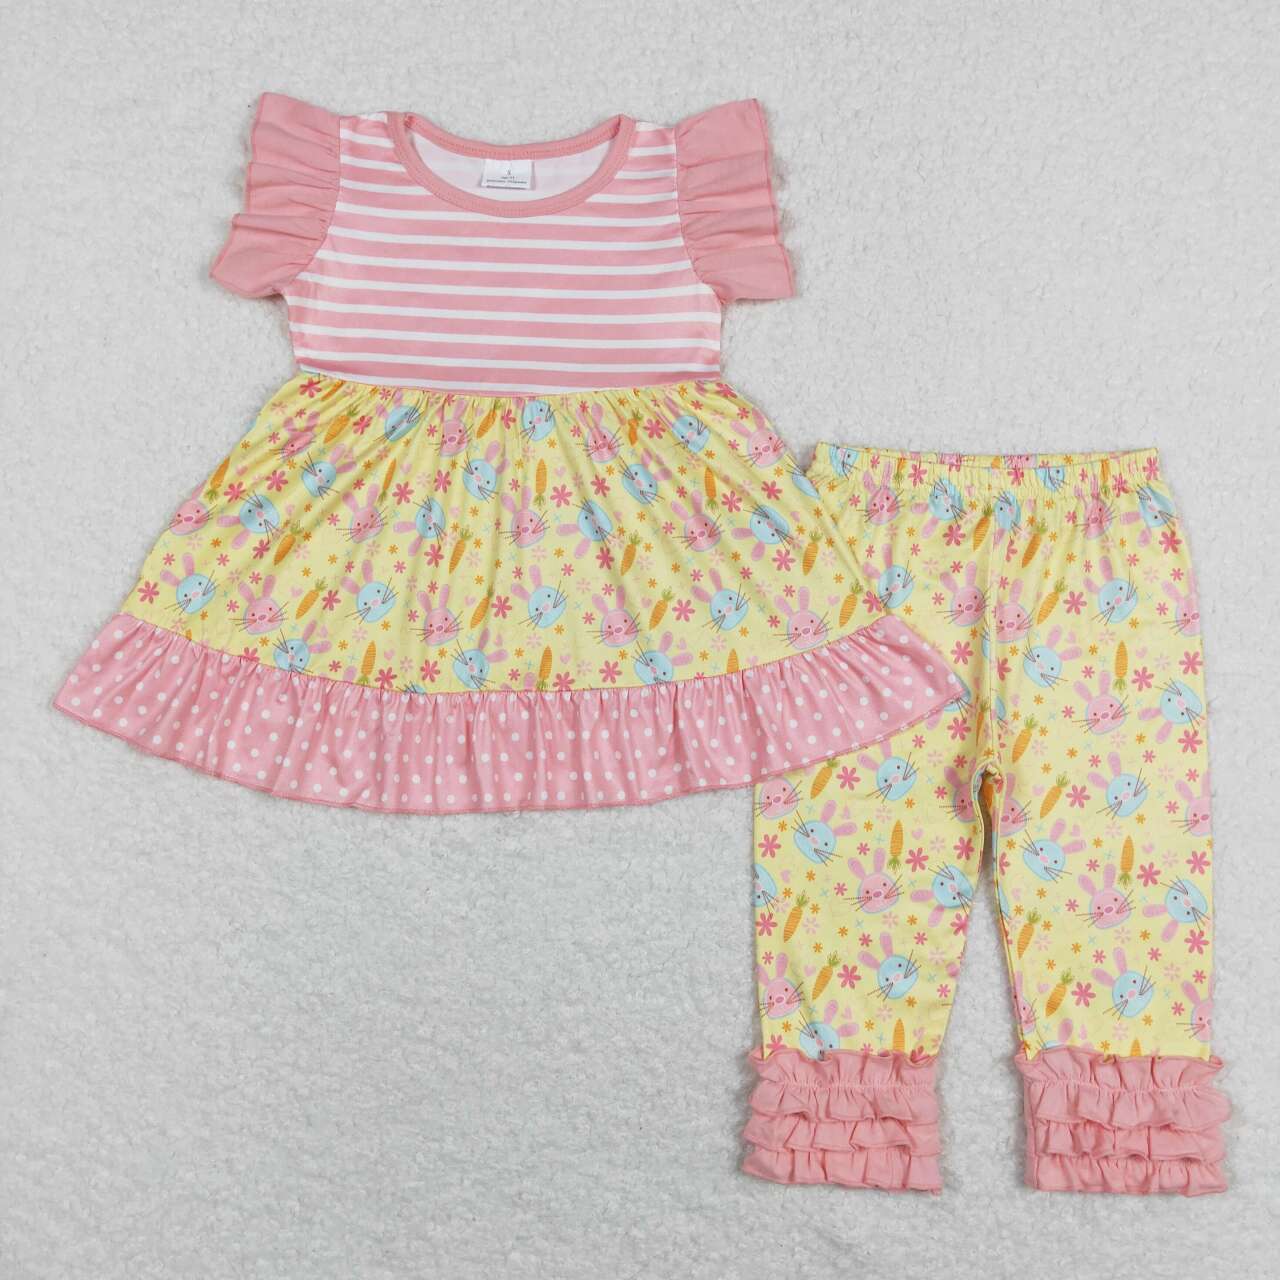 Toddle girls Easter day clothes